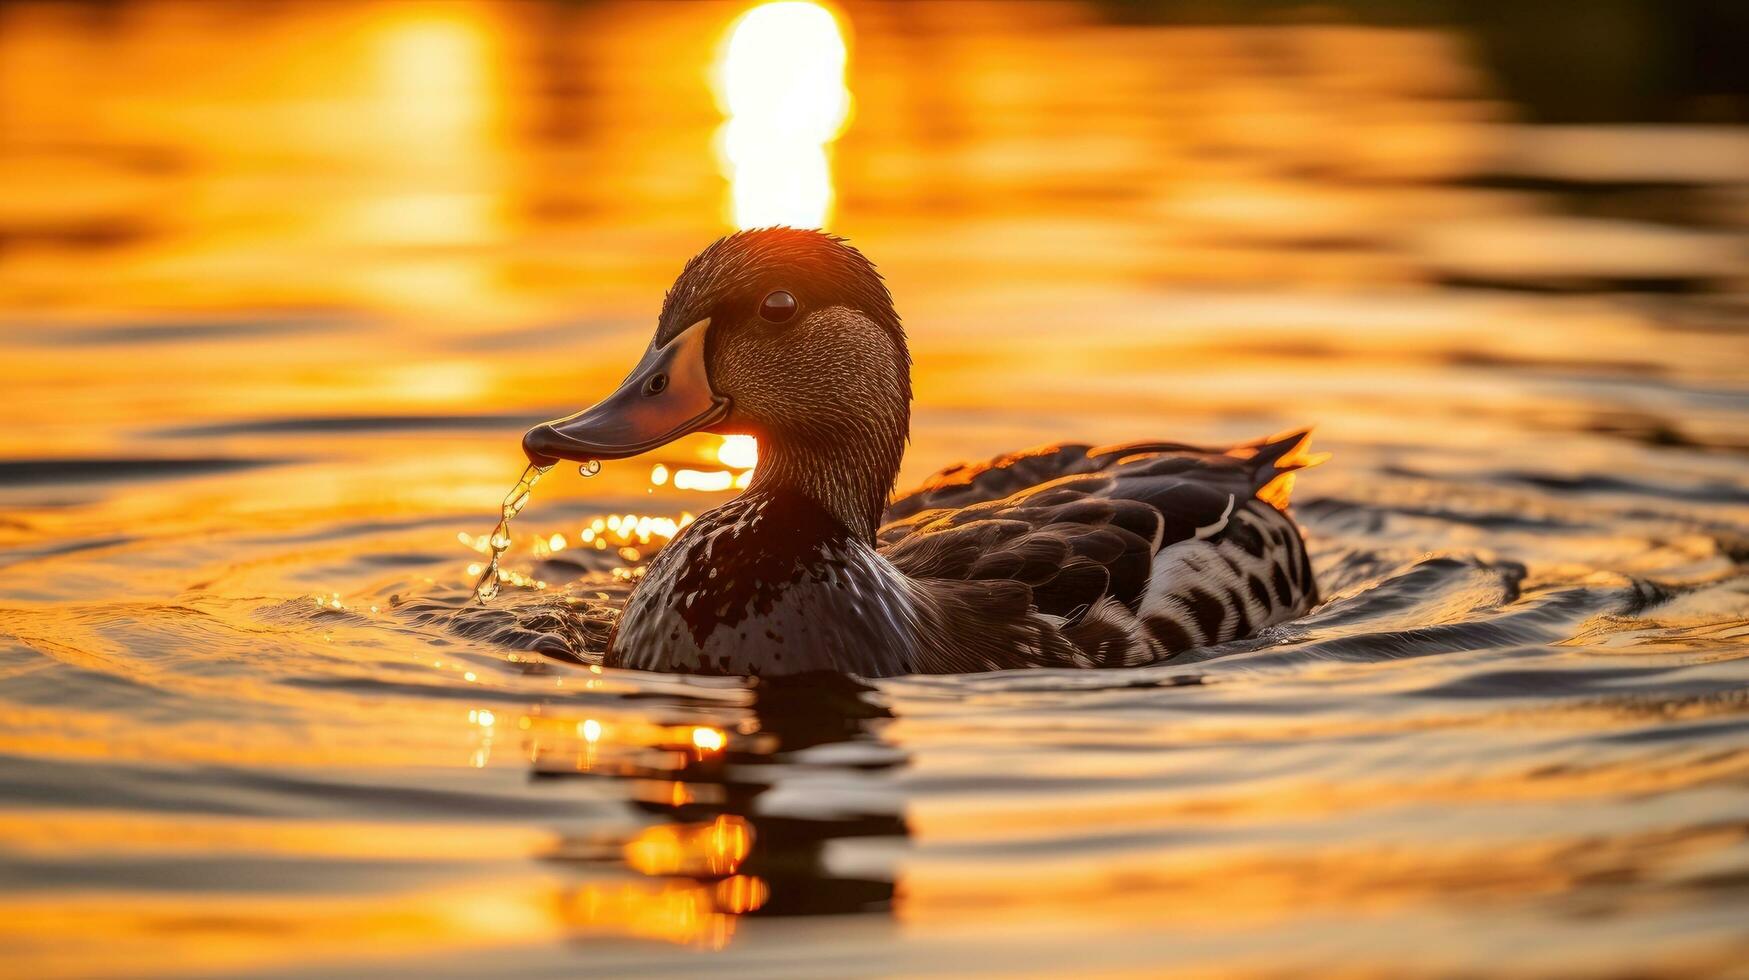 High quality photo of a duck s silhouette in water during sunset